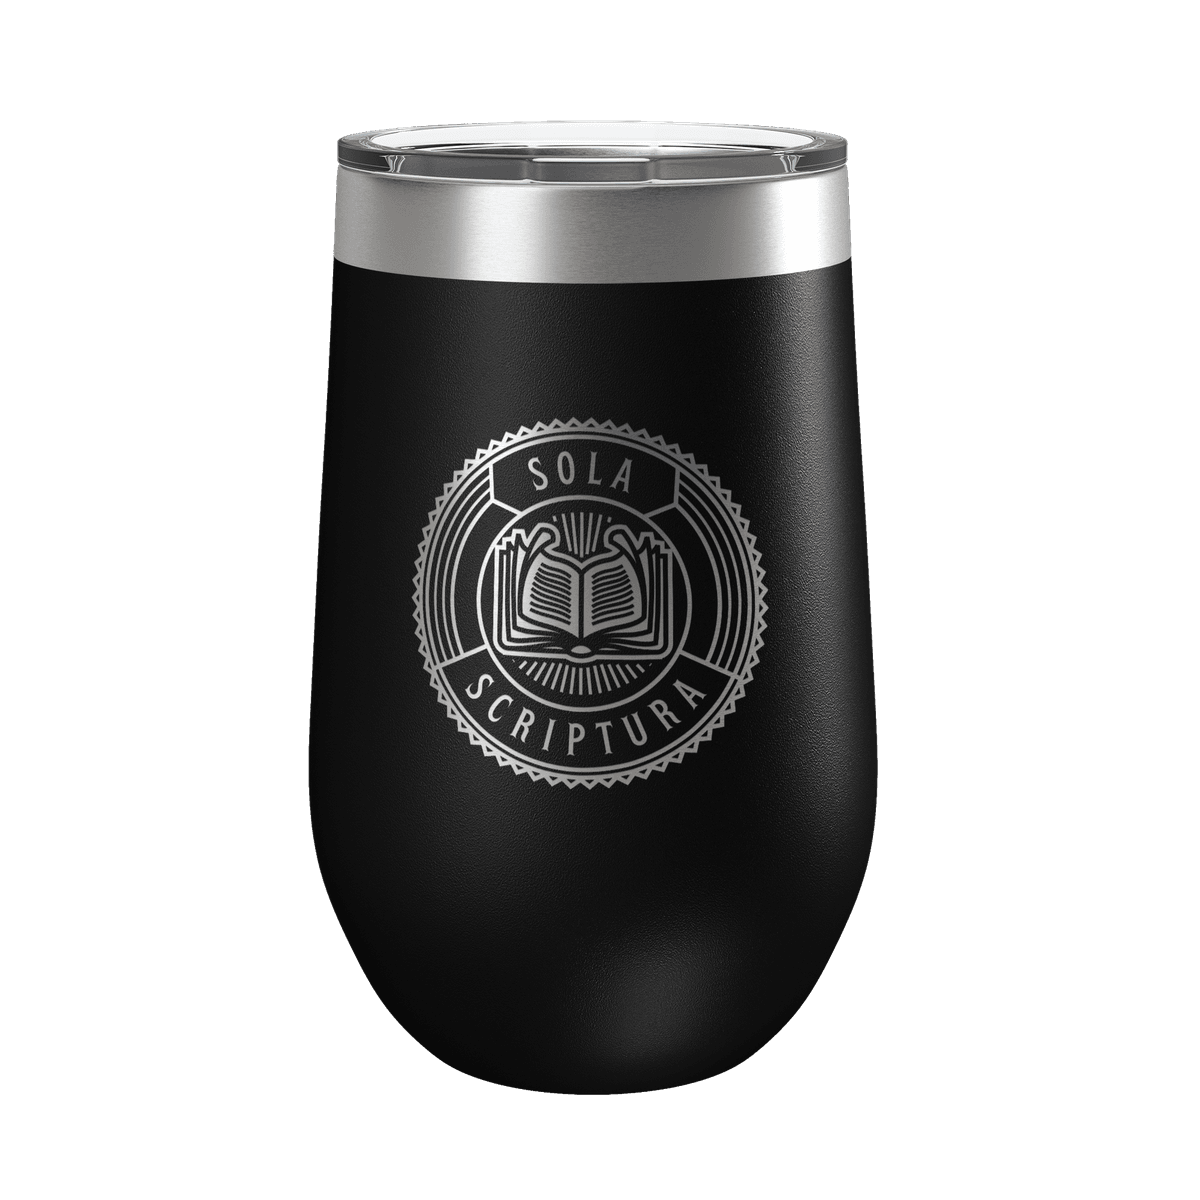 https://d11xh0uby8avni.cloudfront.net/fit-in/0x1200/products/SOLA13-tumbler16-black.png